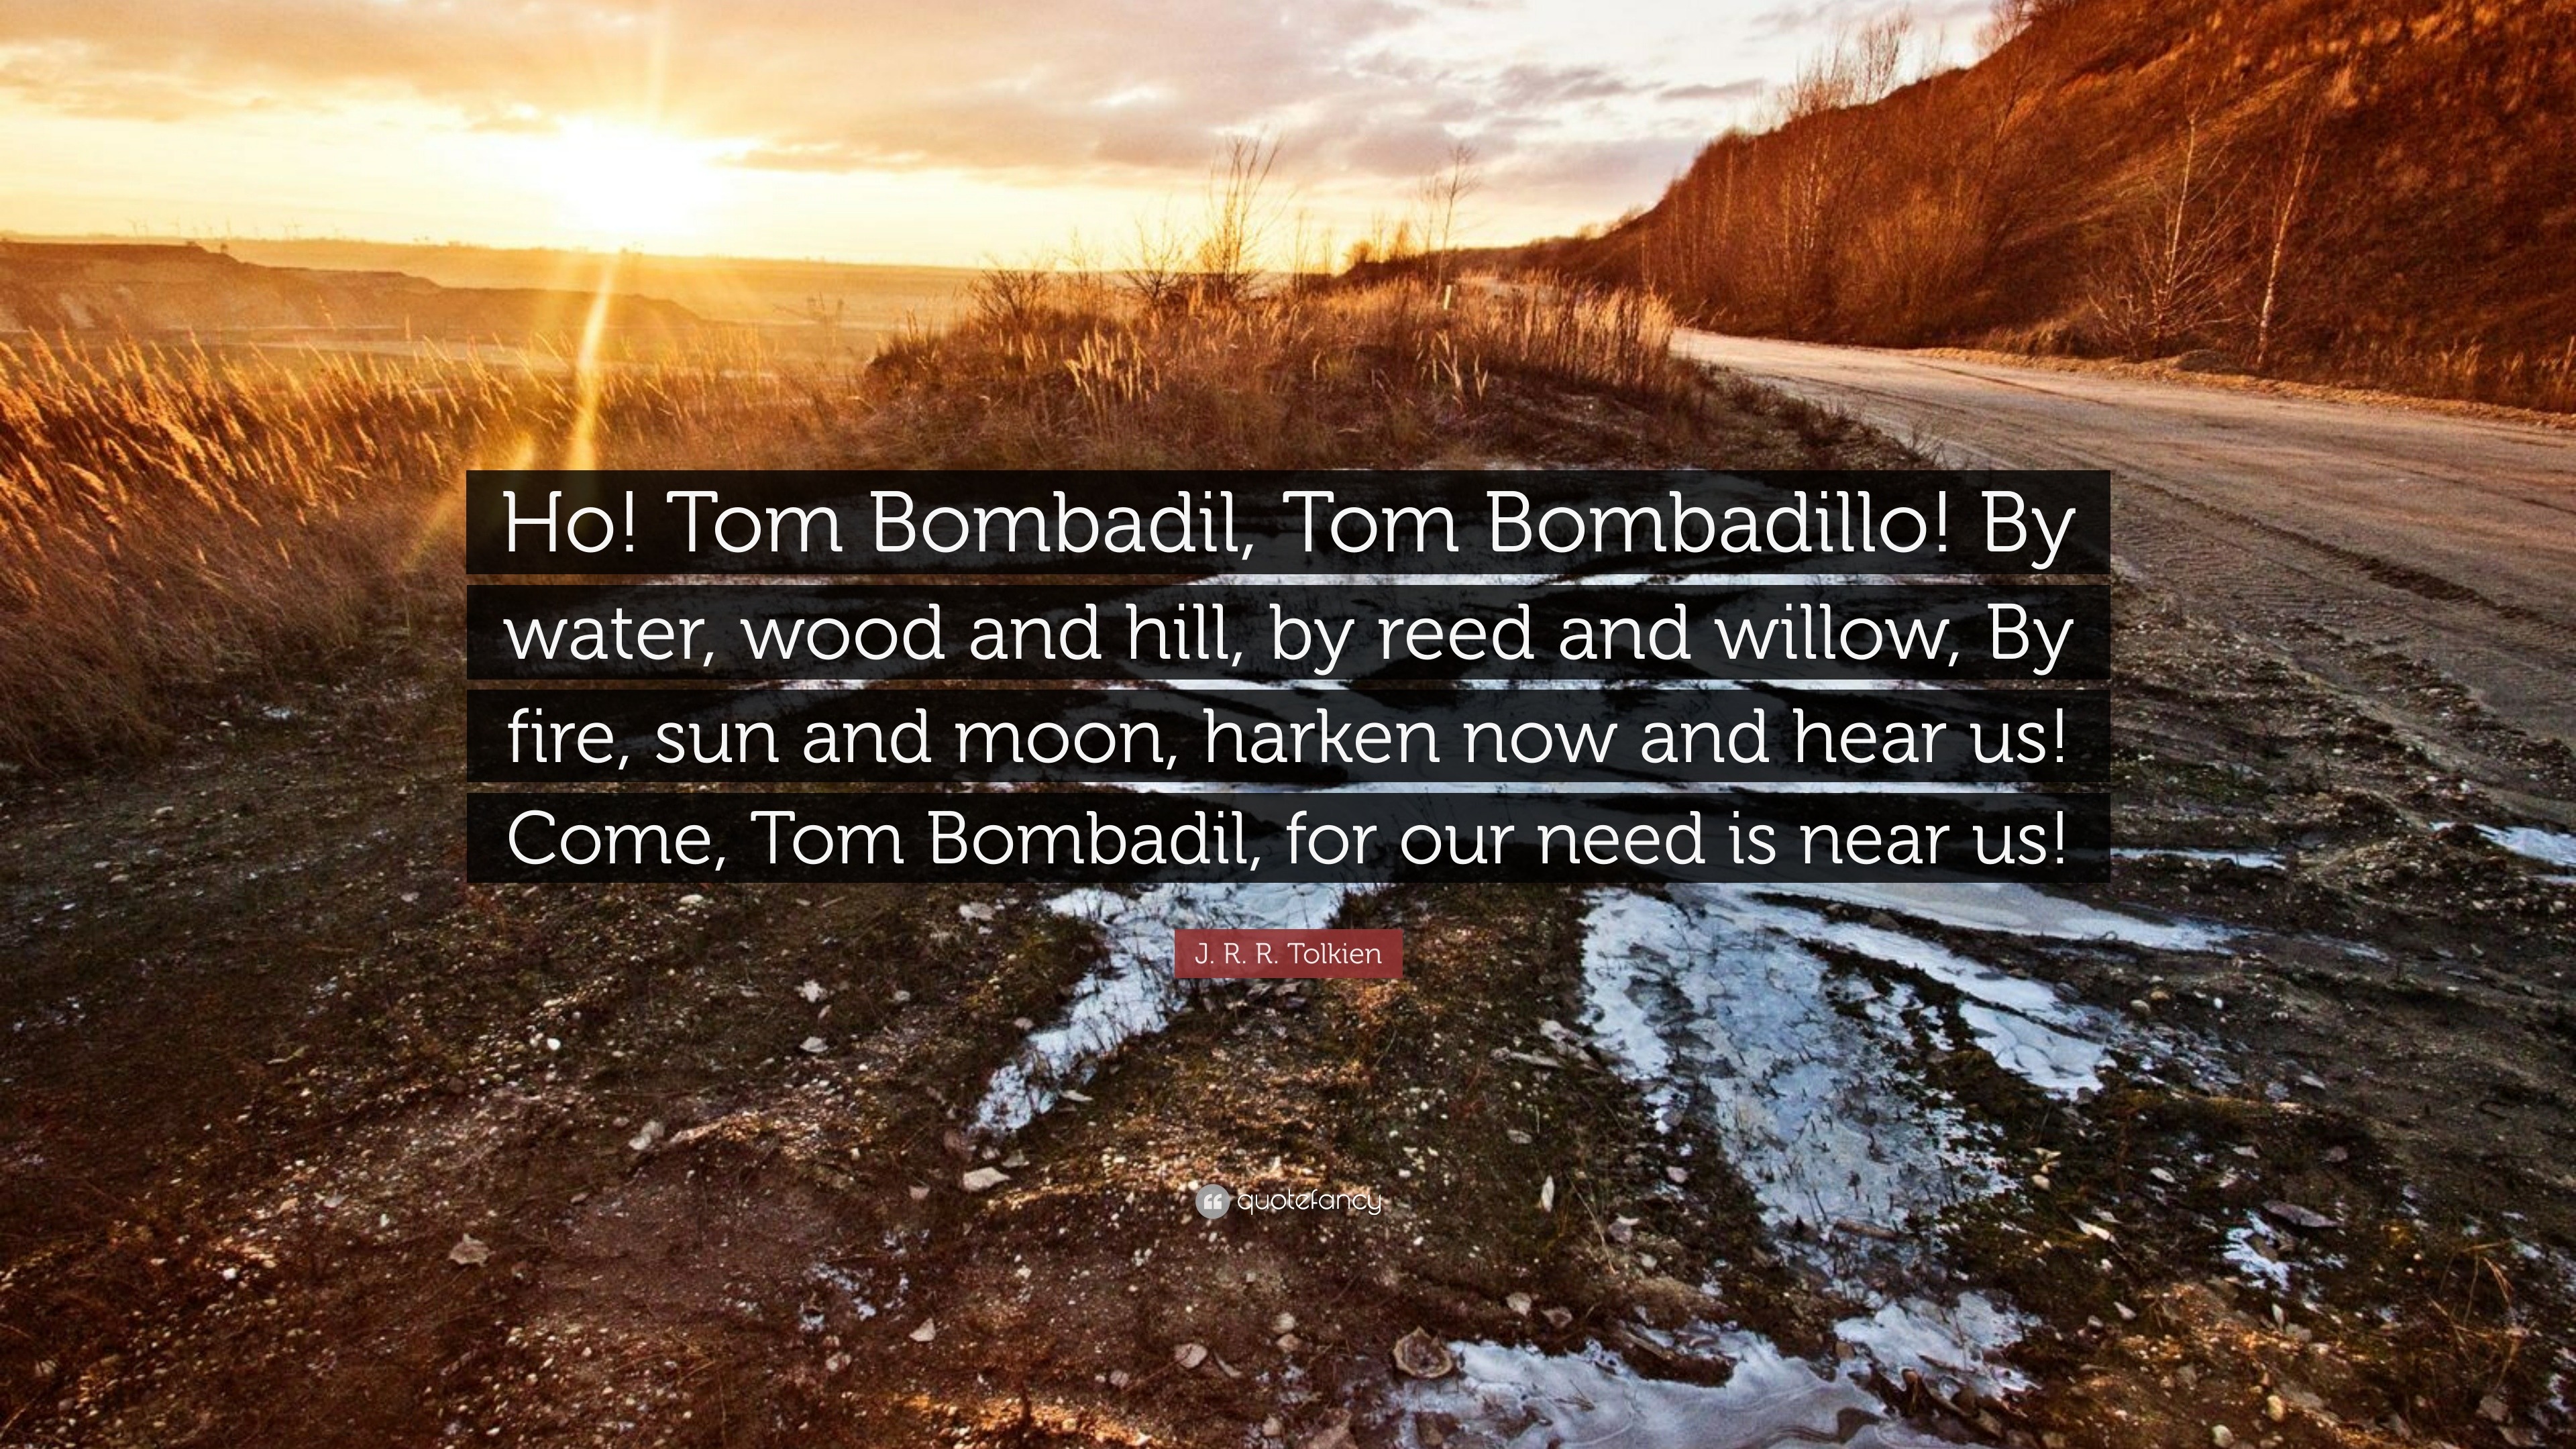 J R R Tolkien Quote Ho Tom Bombadil Tom Bombadillo By Water Wood And Hill By Reed And Willow By Fire Sun And Moon Harken Now And Hea 7 Wallpapers Quotefancy A childish figure so disliked by fans of the book that few object to his absence from all adaptations of the story. j r r tolkien quote ho tom